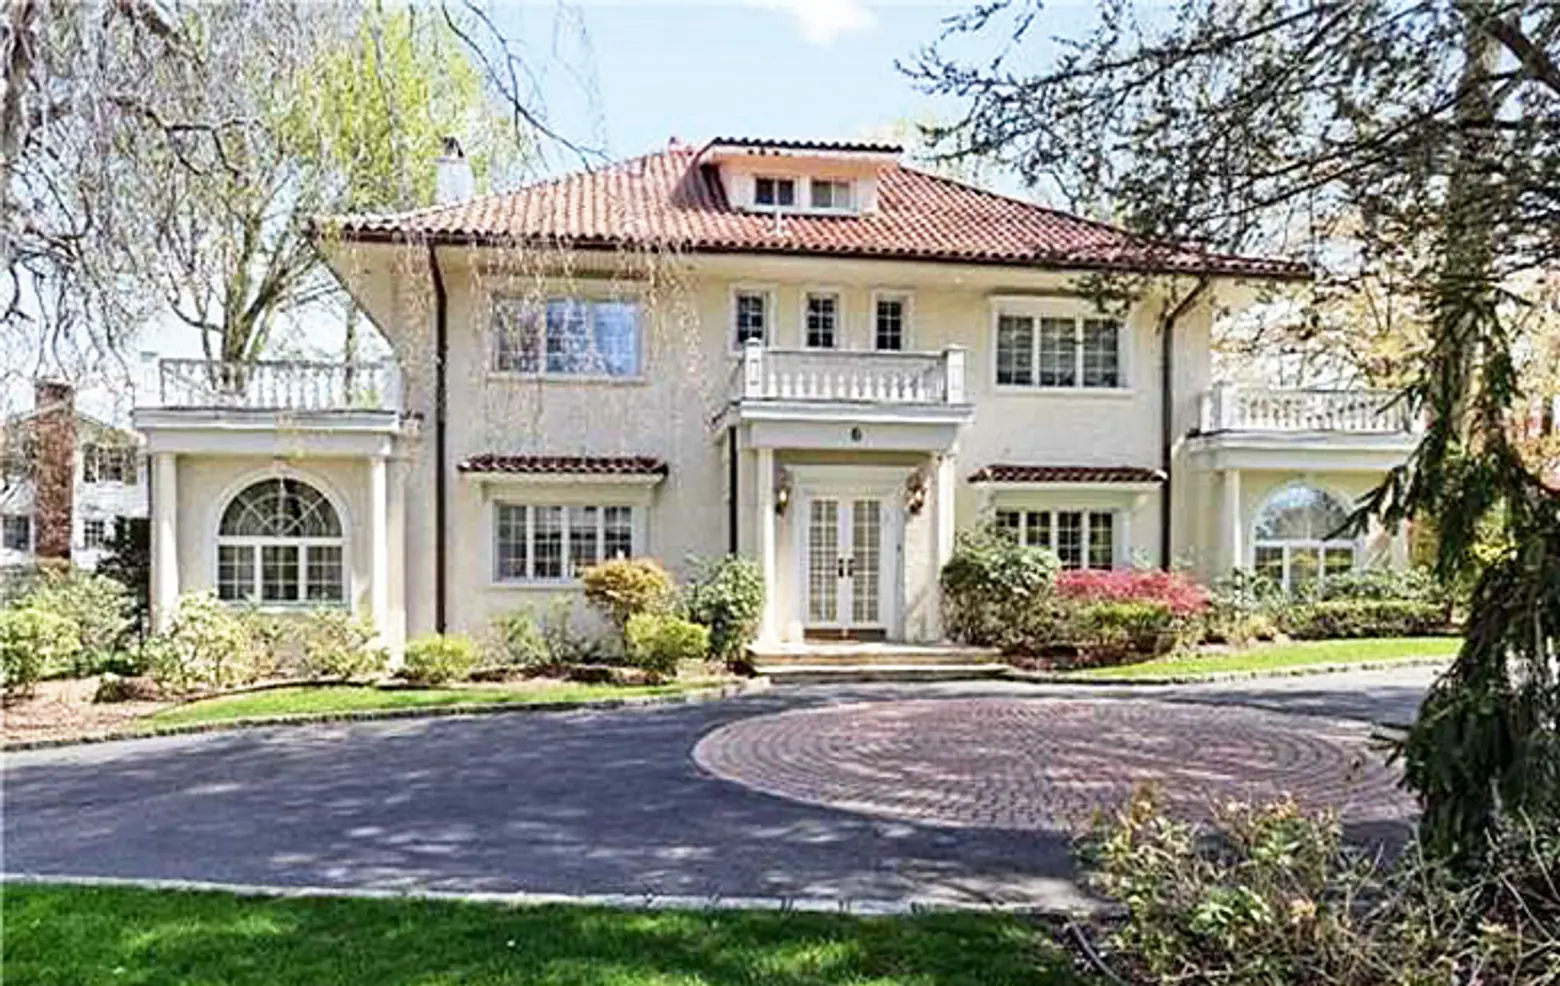 Great Neck Home Where F. Scott Fitzgerald Started Writing ‘The Great Gatsby’ Lists for $4M